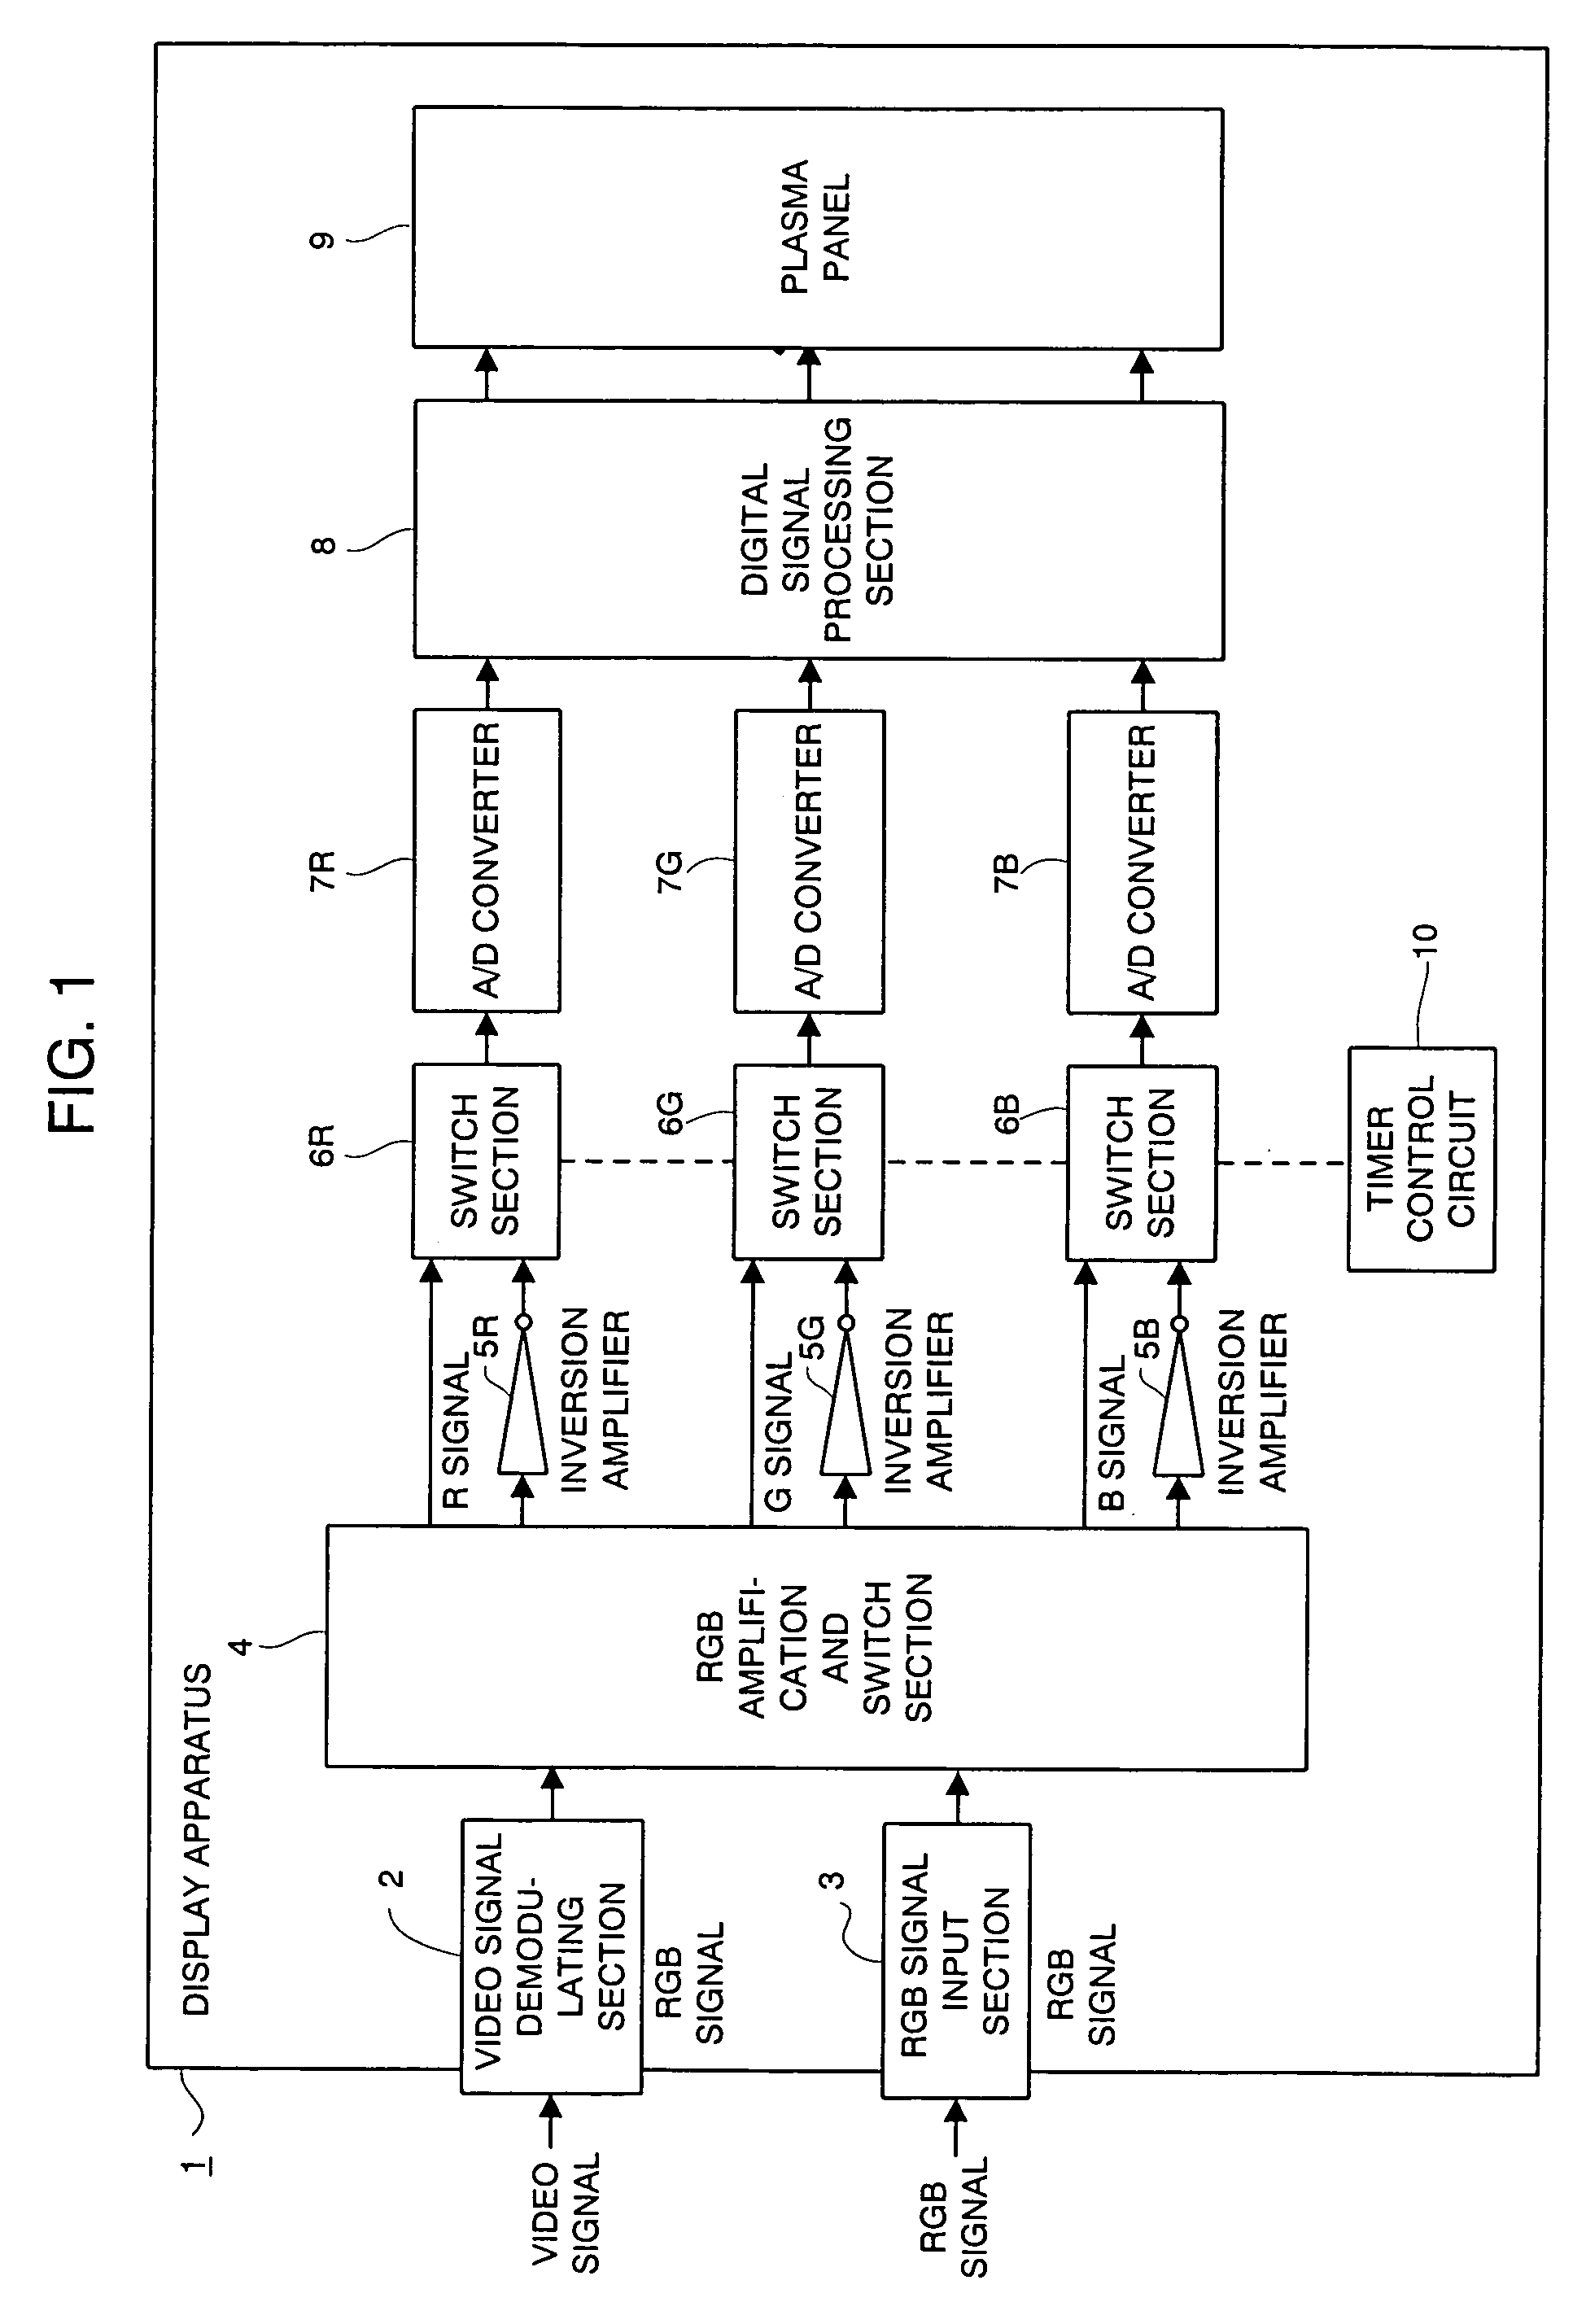 Display apparatus having uniformity function of pixel luminescence frequency and display method